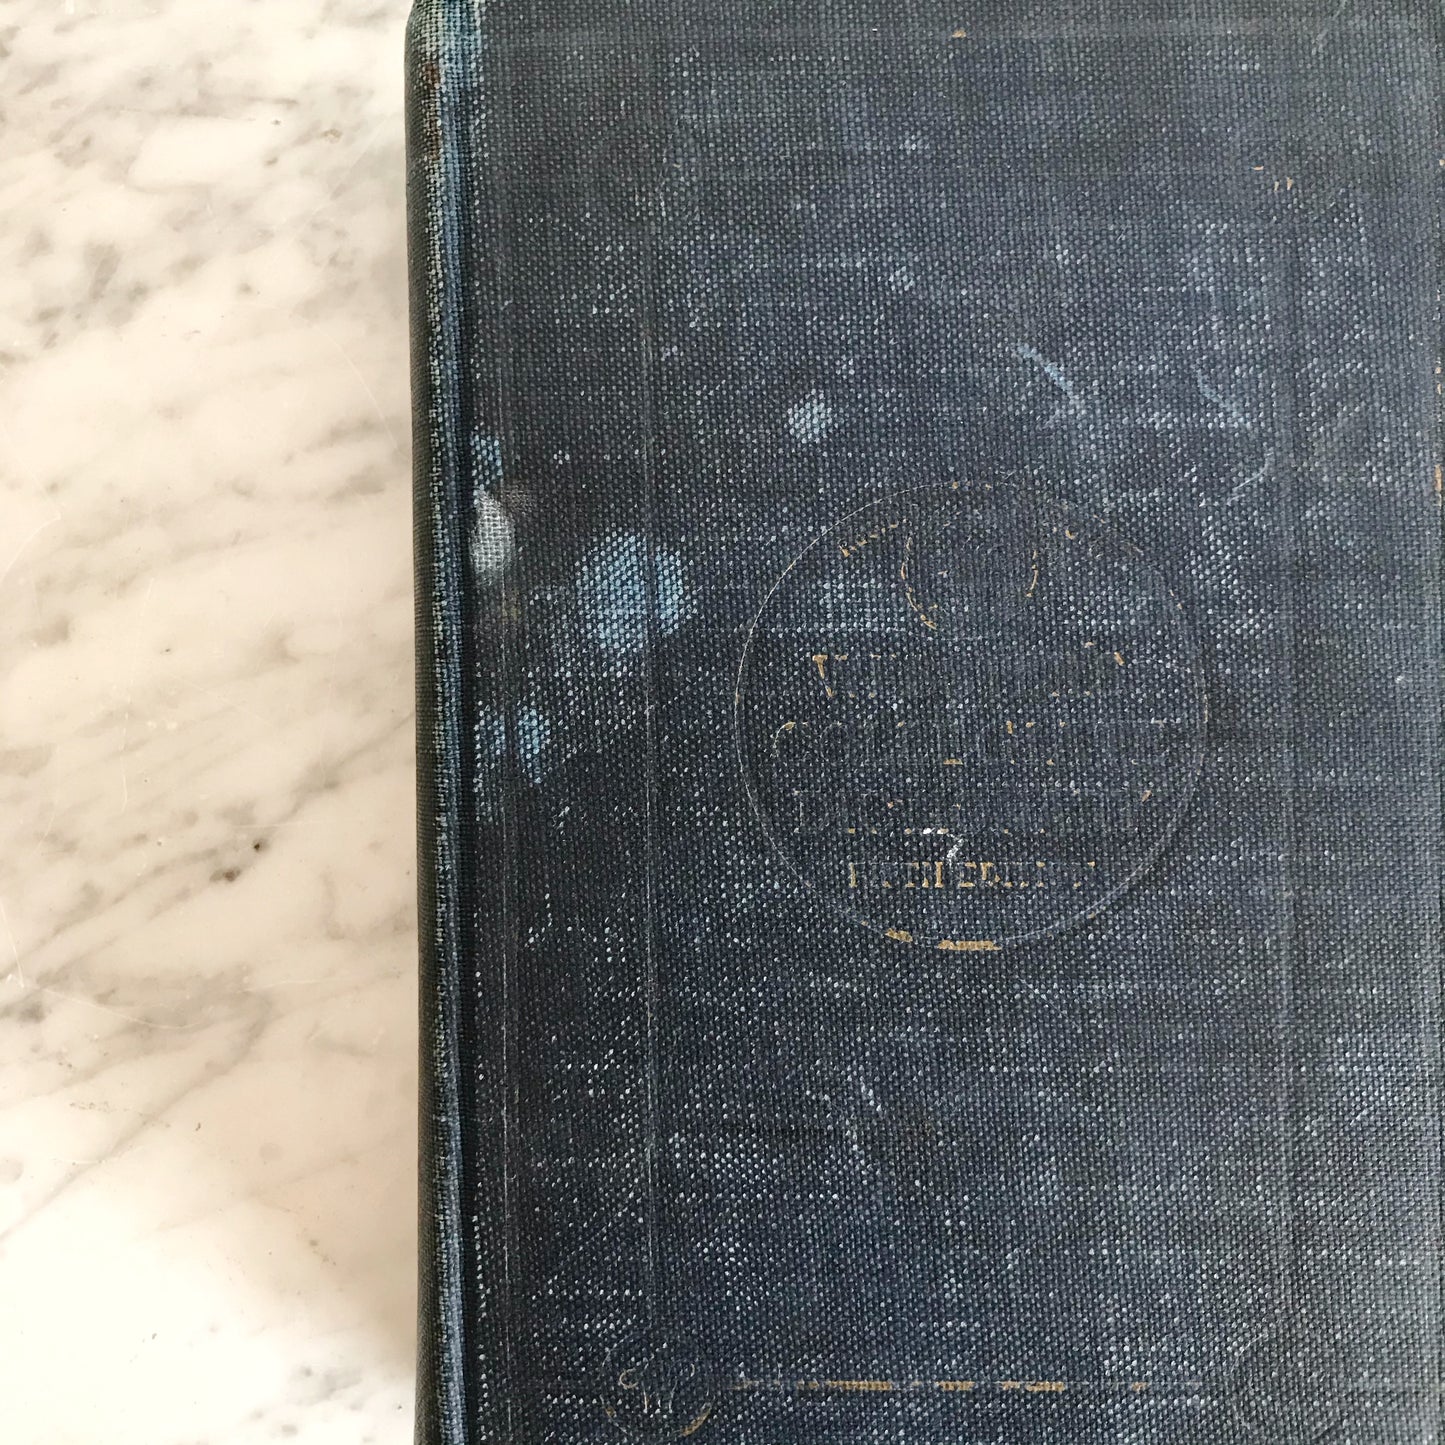 Book: 1936 Webster's Collegiate Dictionary